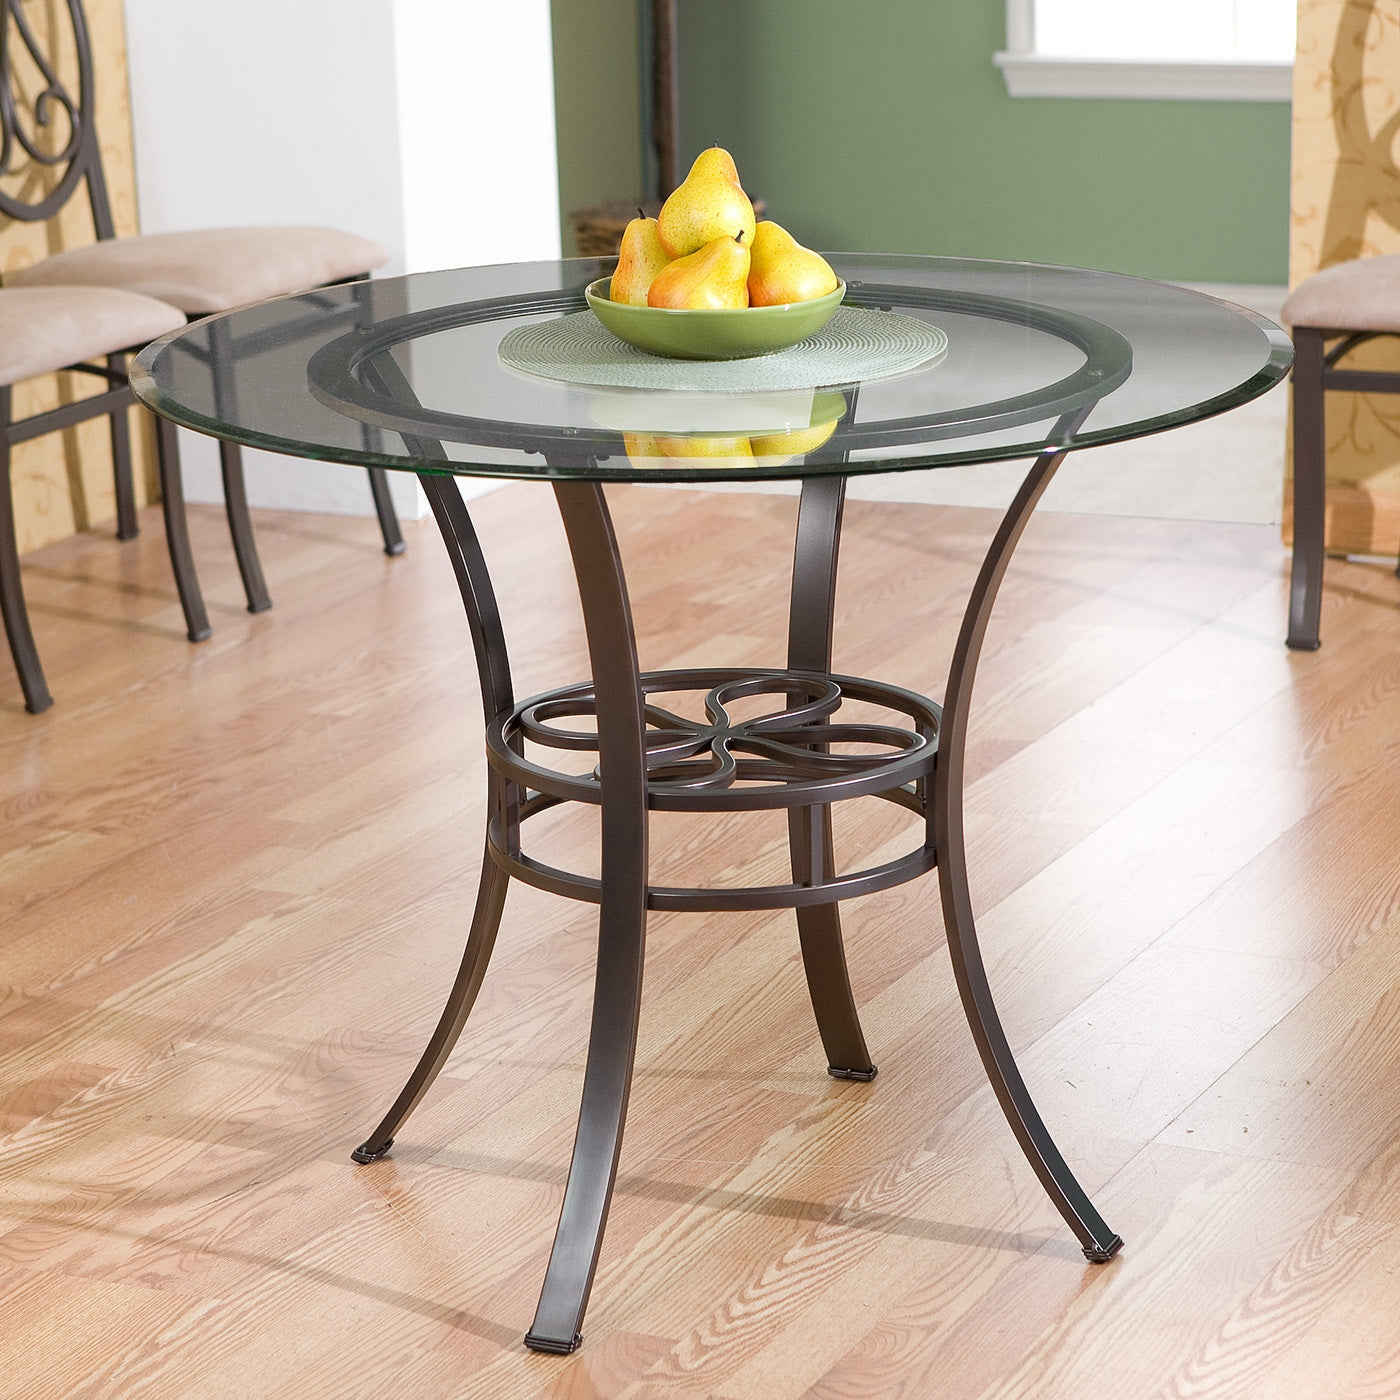 Dining > Dining Tables - Round Glass Top Dining Table With Durable Metal Base